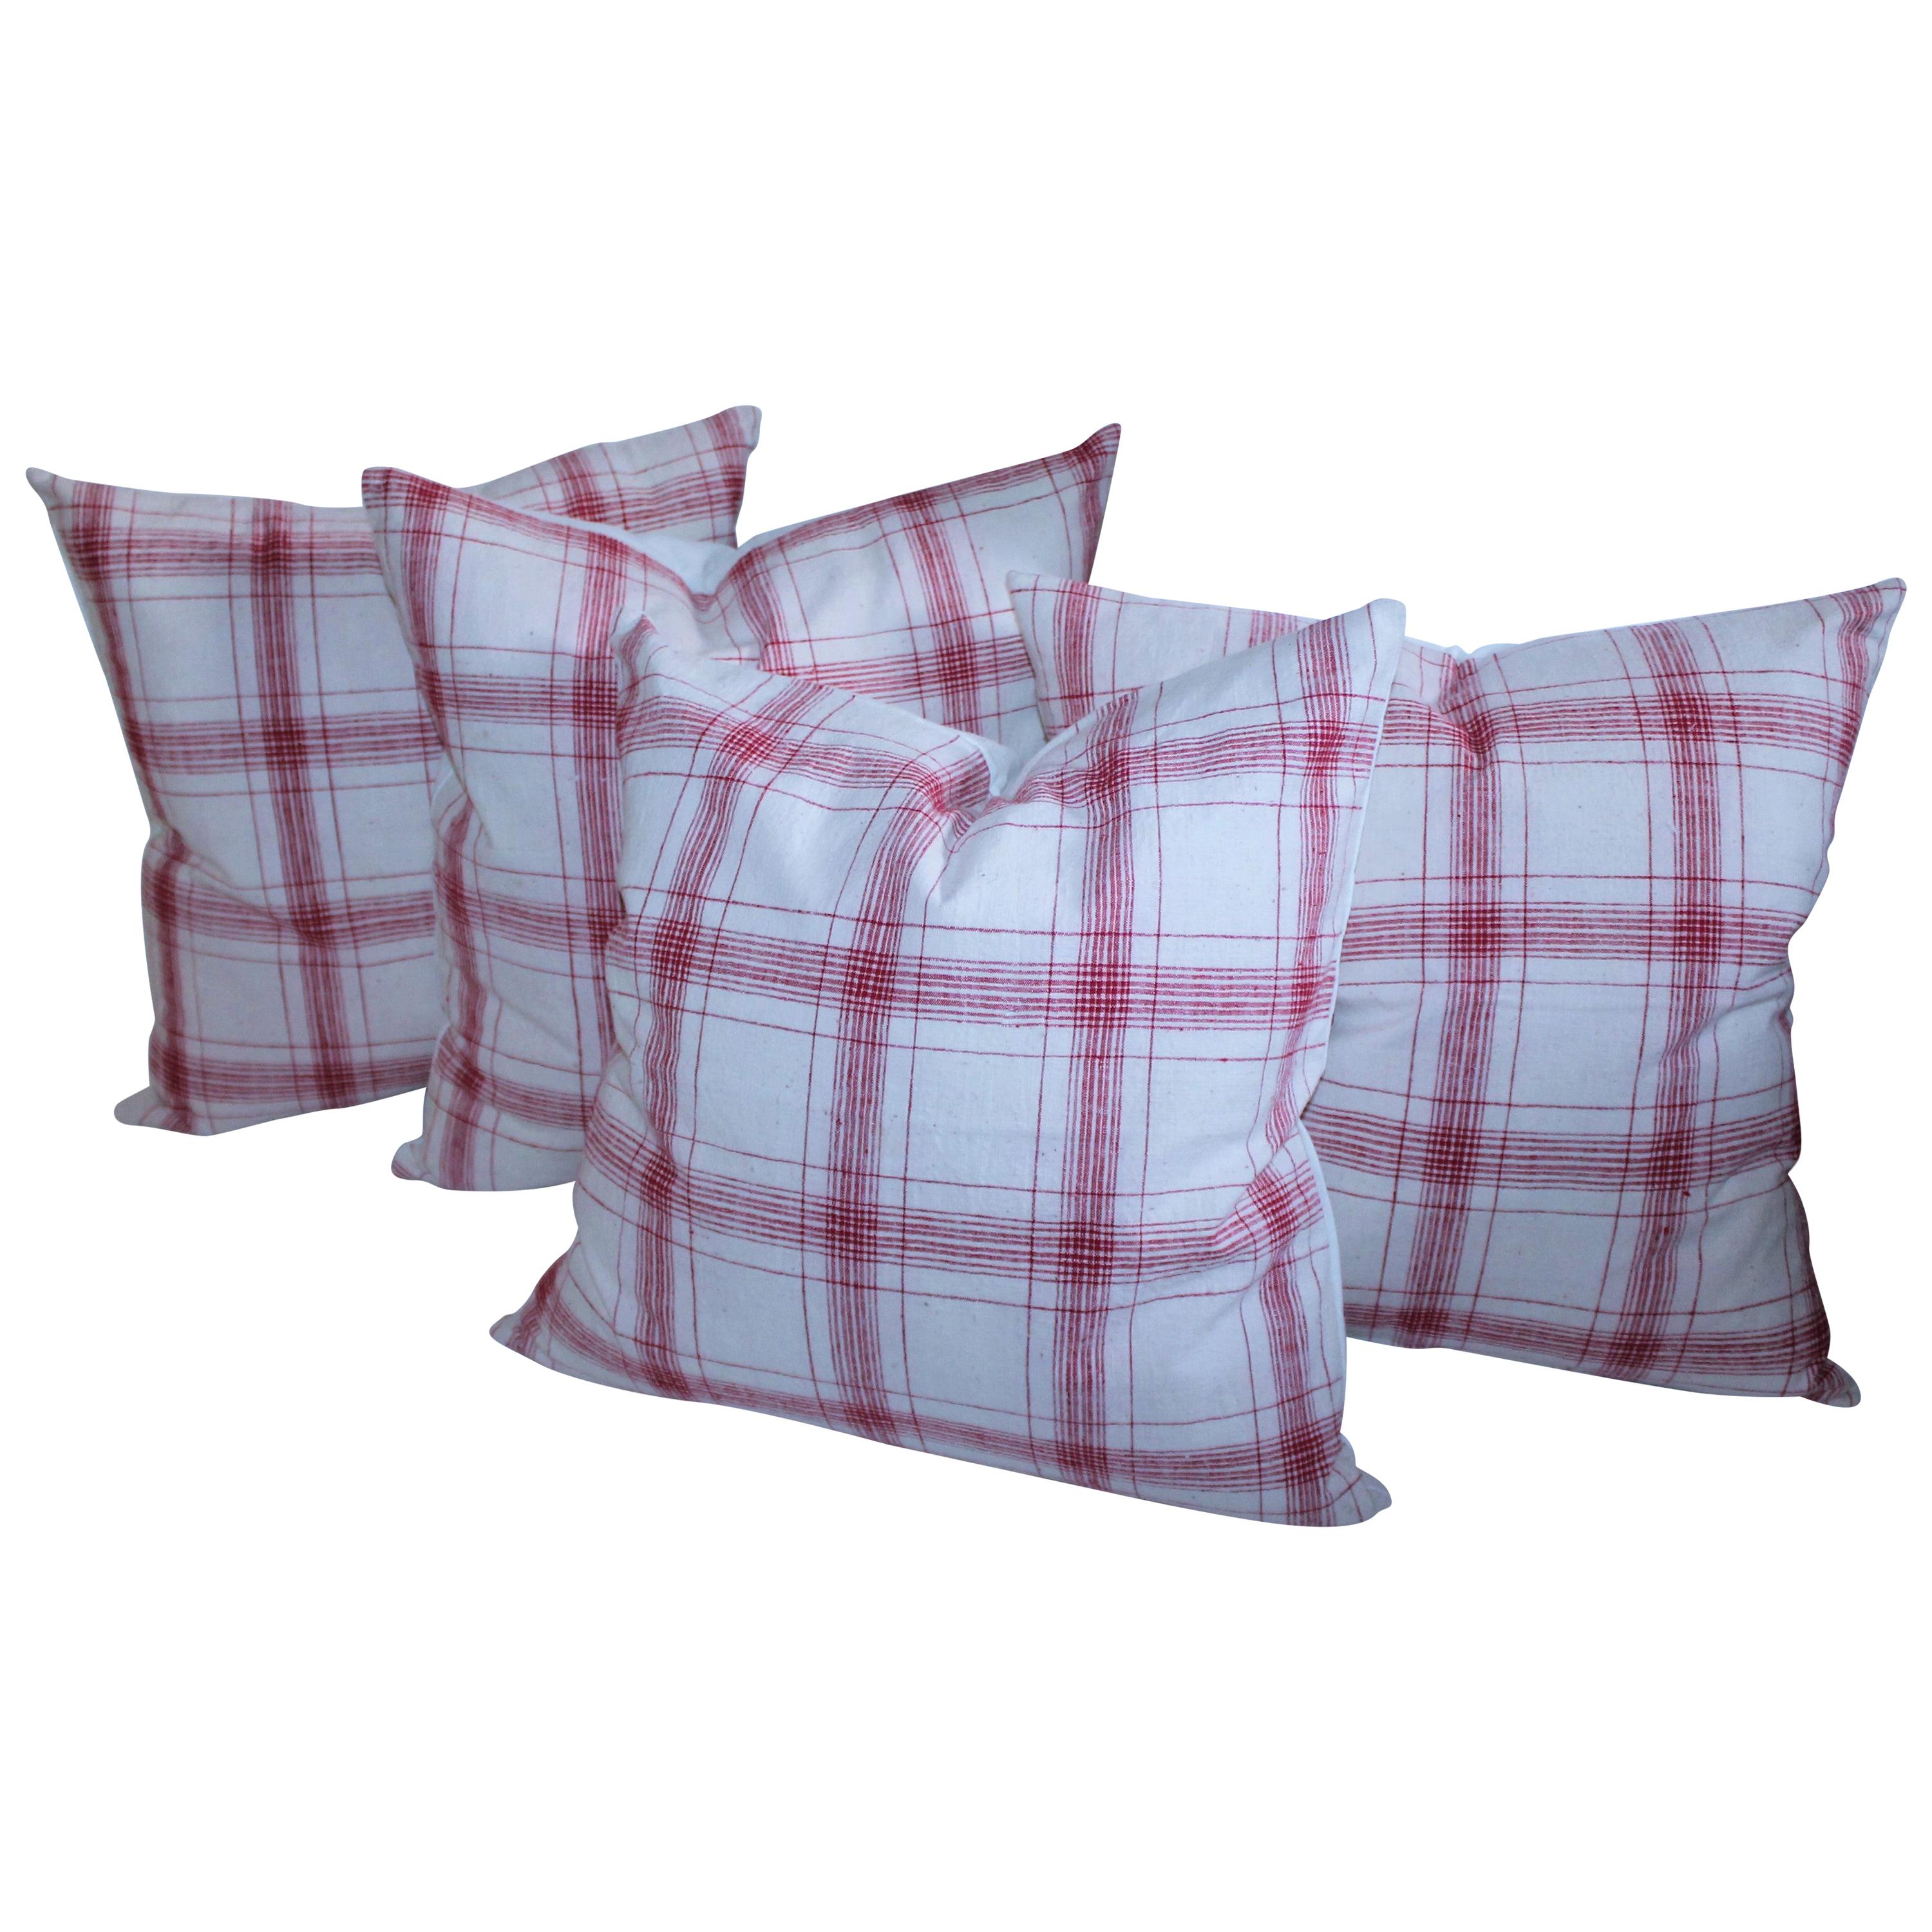 19th Century Red and White Homespun Linen Pillows